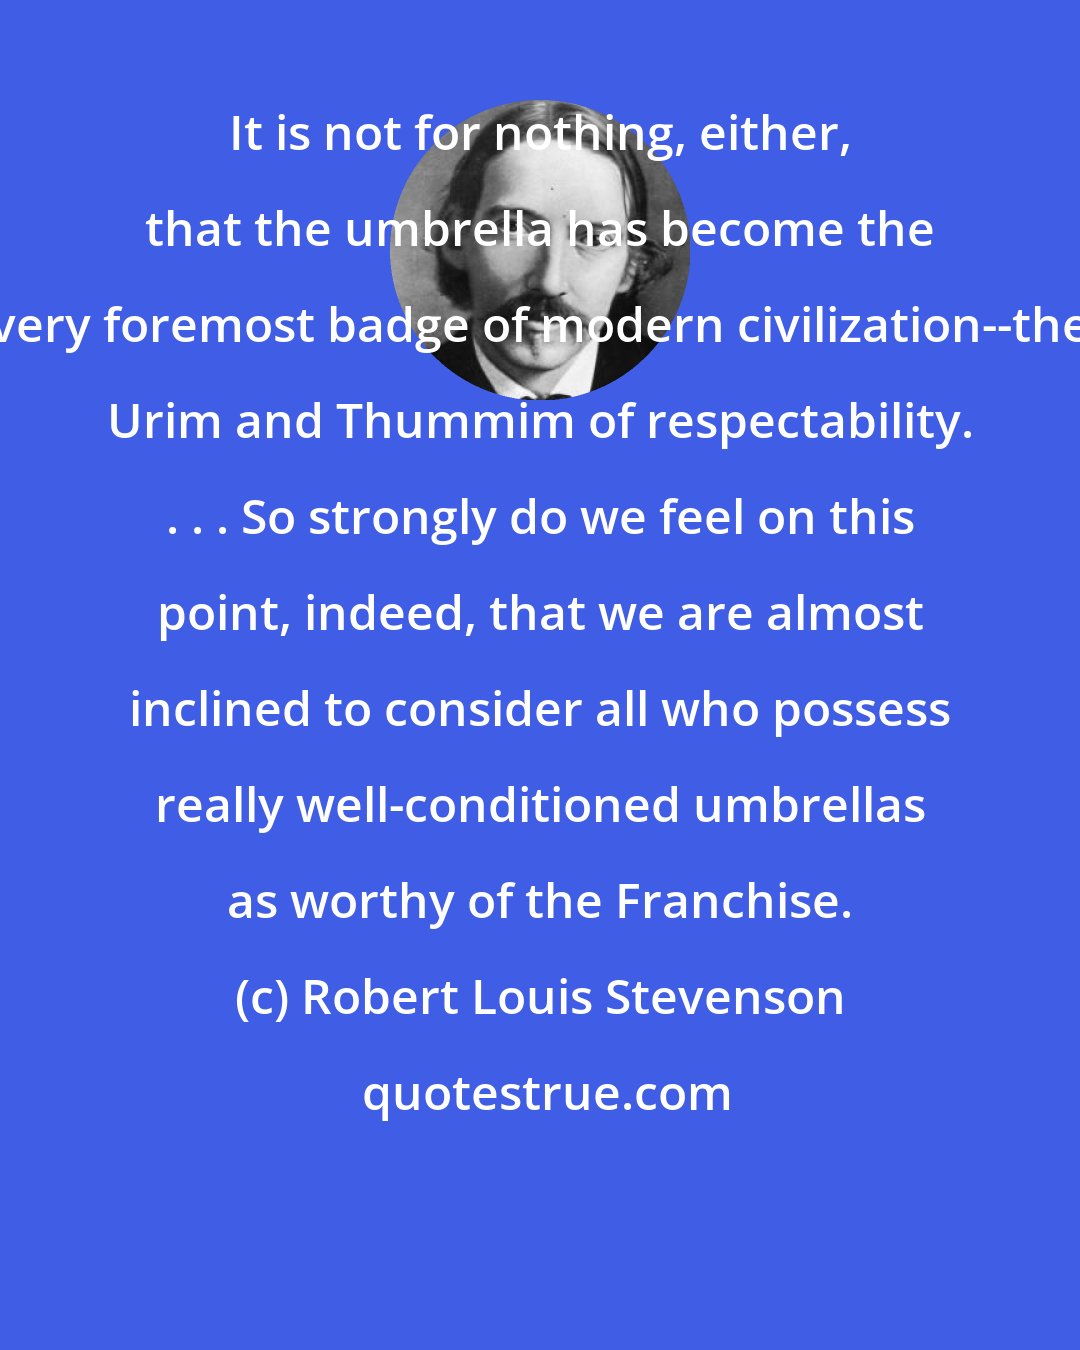 Robert Louis Stevenson: It is not for nothing, either, that the umbrella has become the very foremost badge of modern civilization--the Urim and Thummim of respectability. . . . So strongly do we feel on this point, indeed, that we are almost inclined to consider all who possess really well-conditioned umbrellas as worthy of the Franchise.